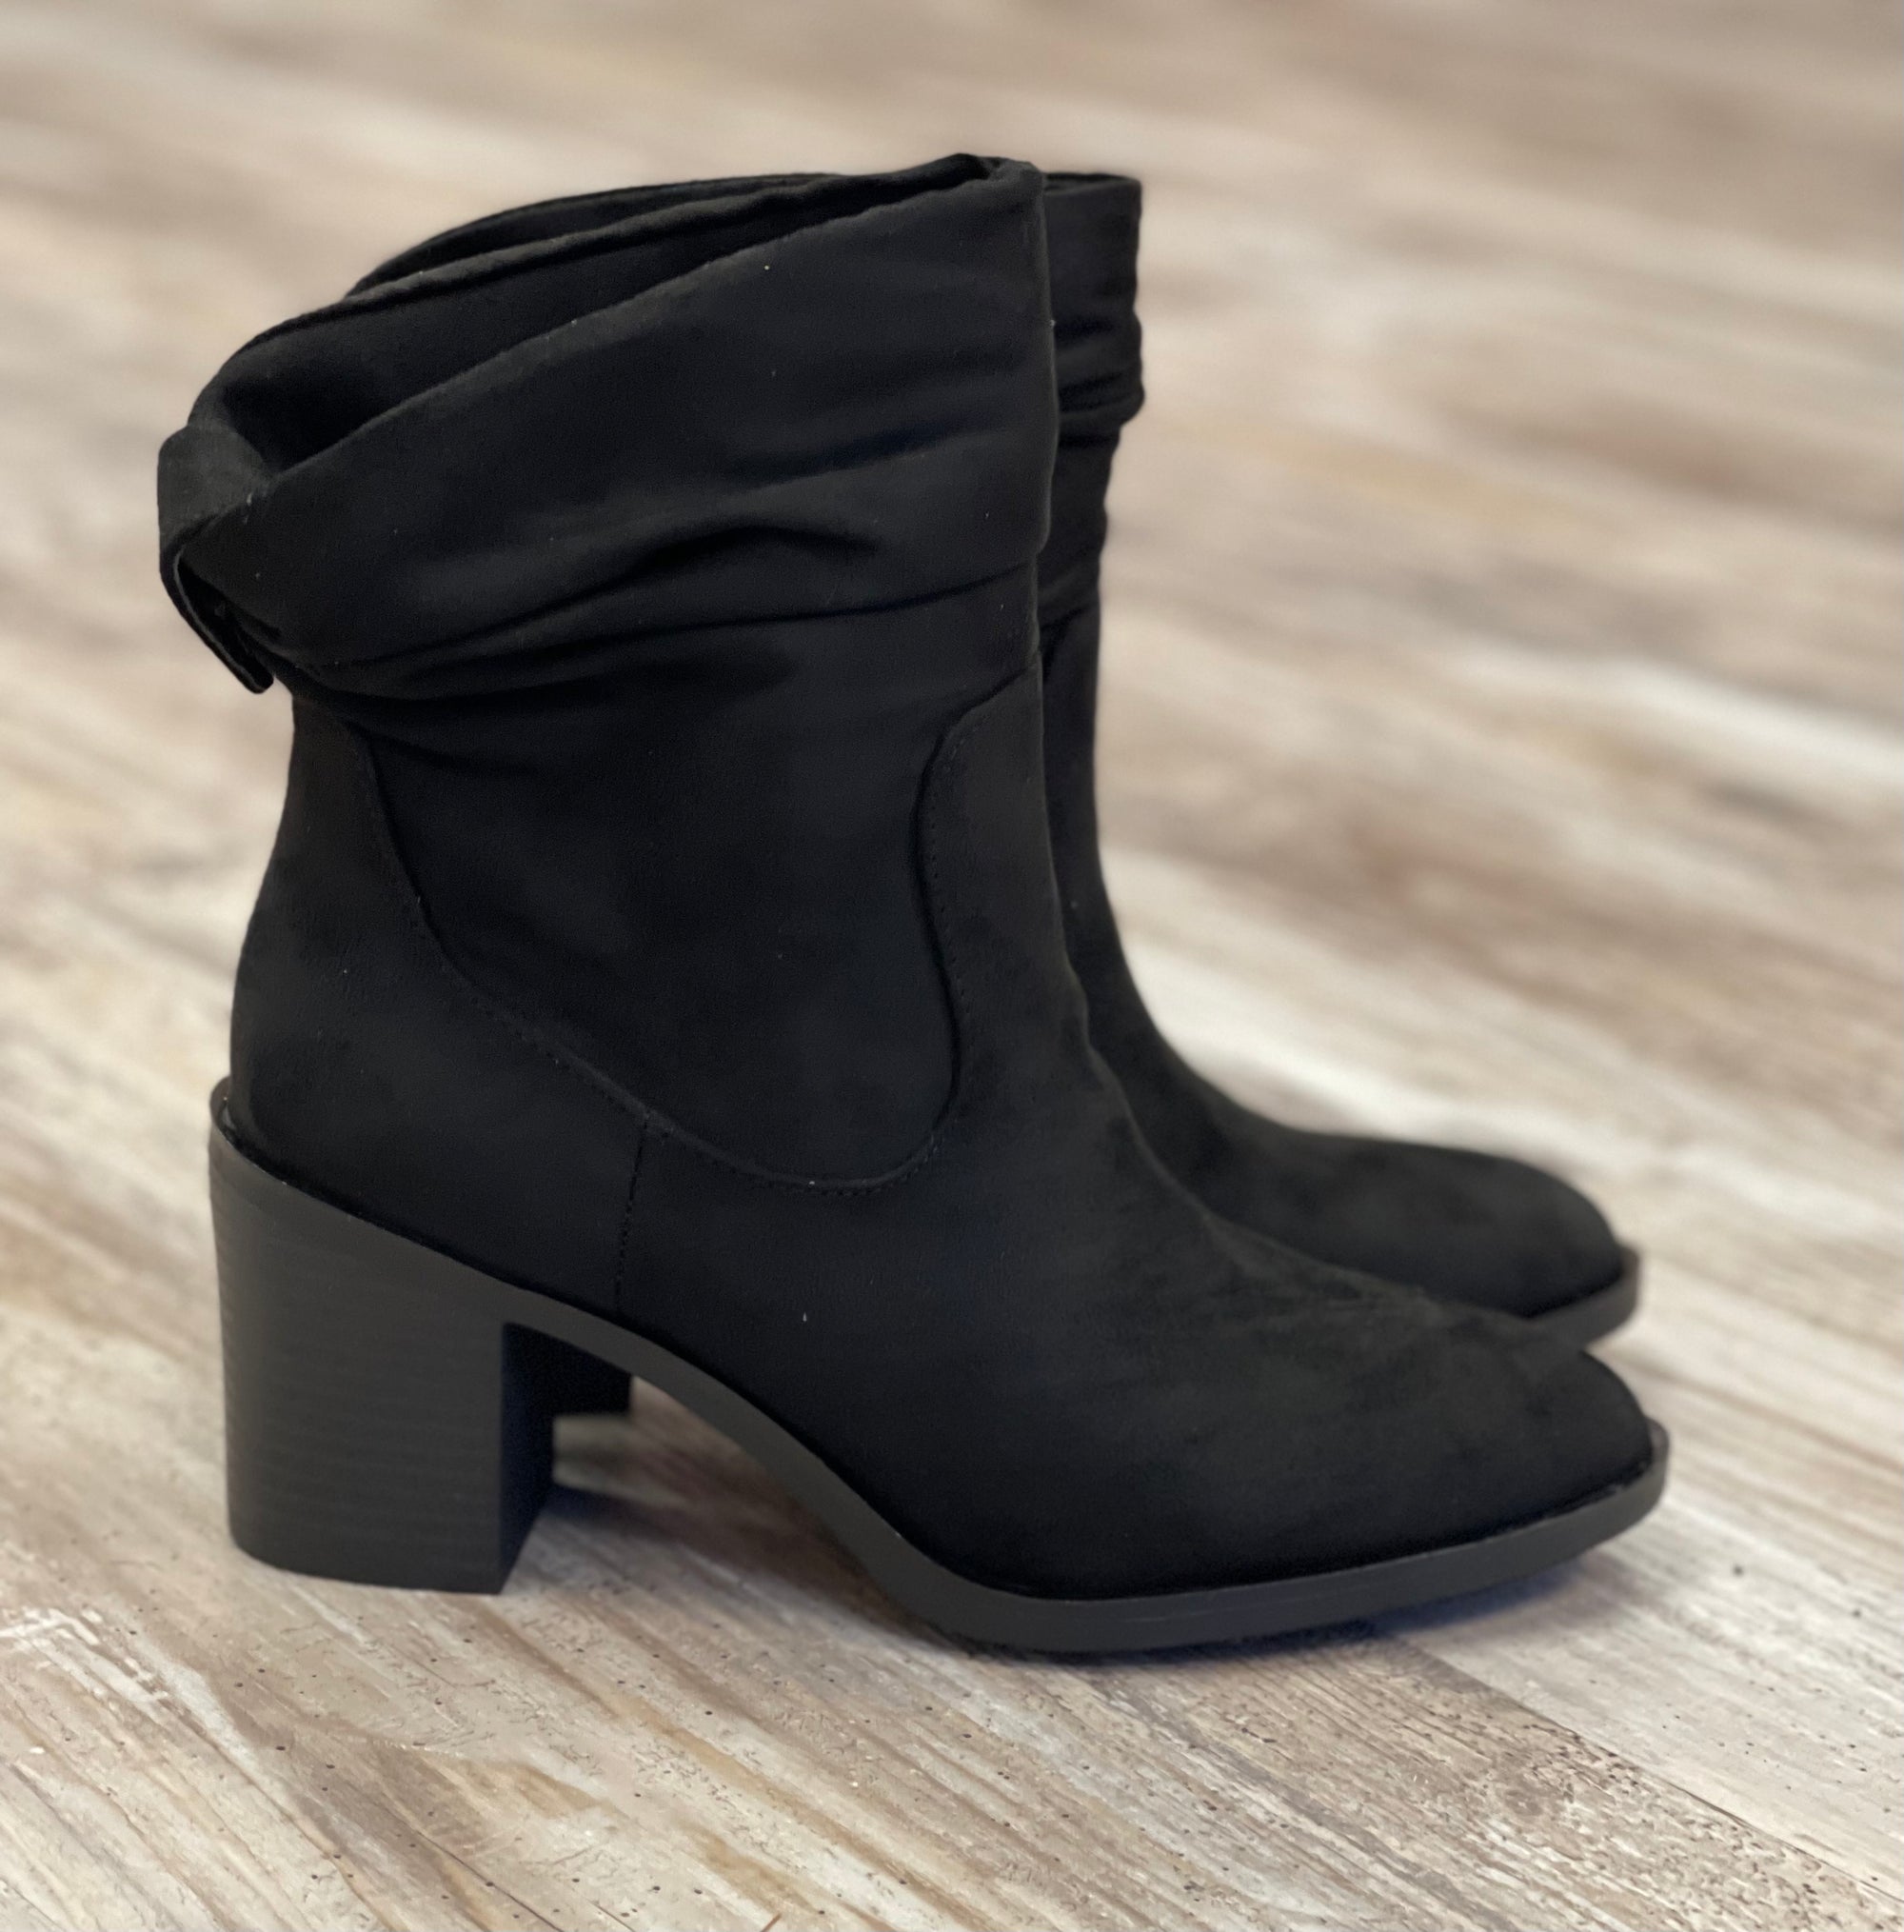 The Aria Bootie